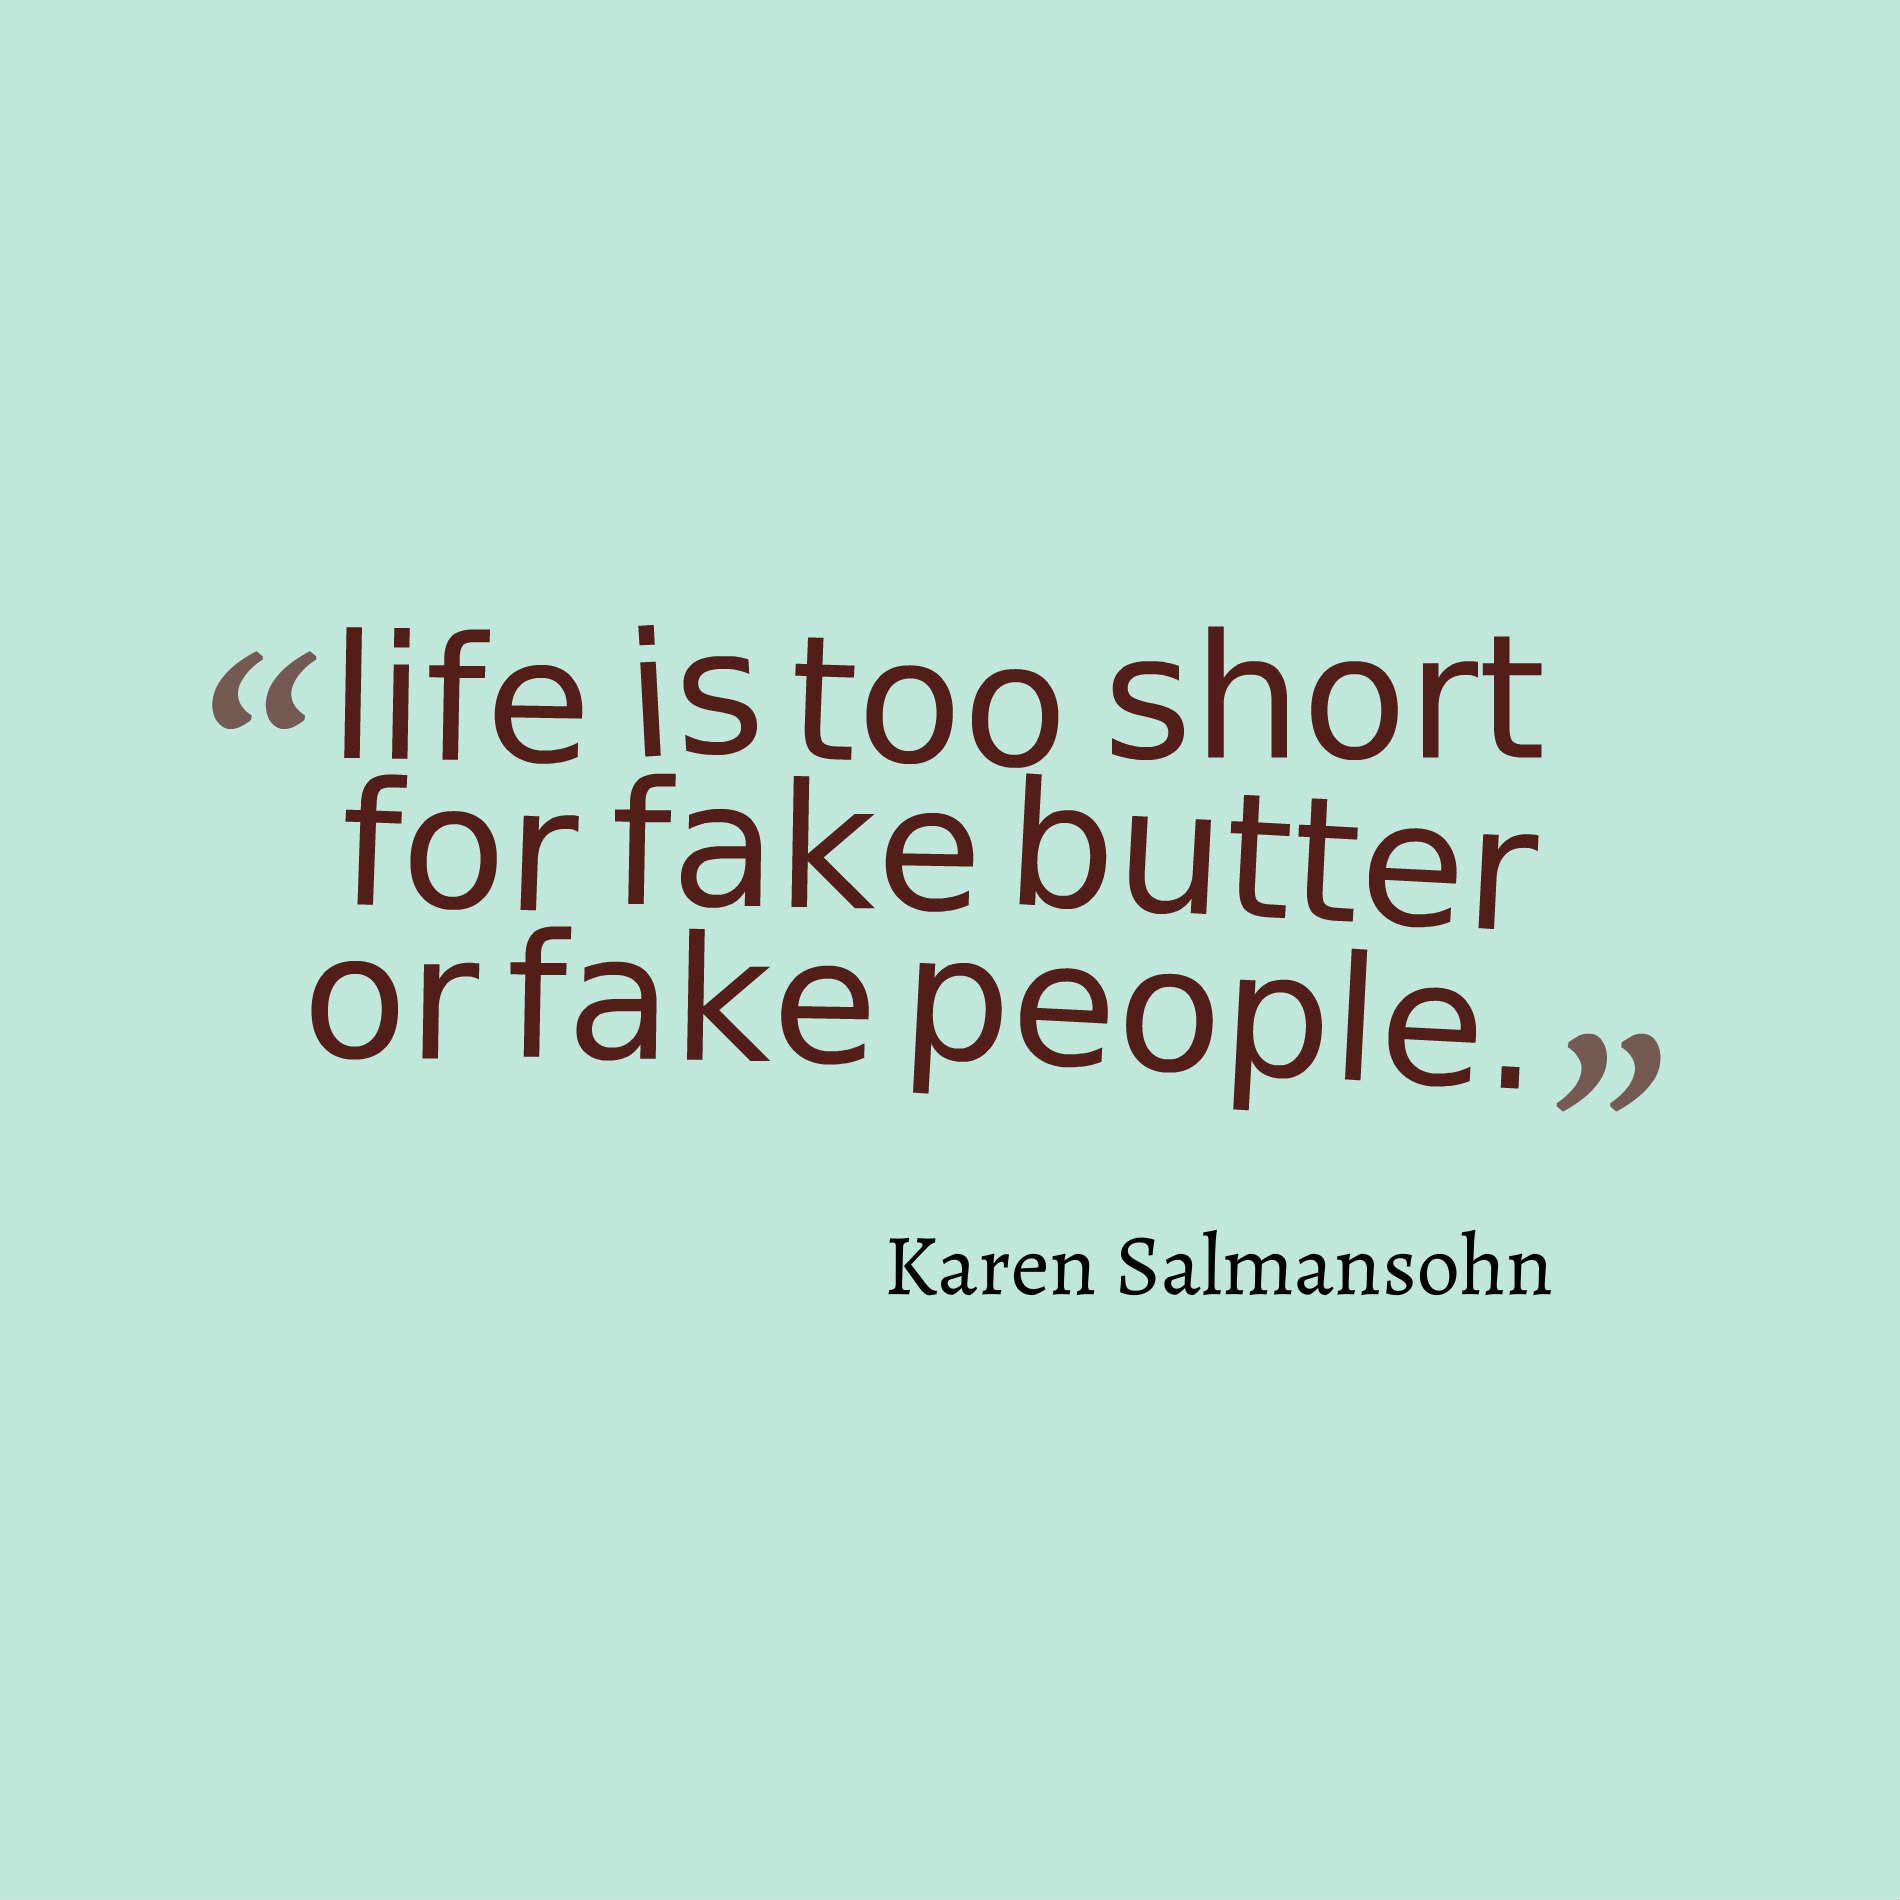 life is too short for fake butter or fake people.